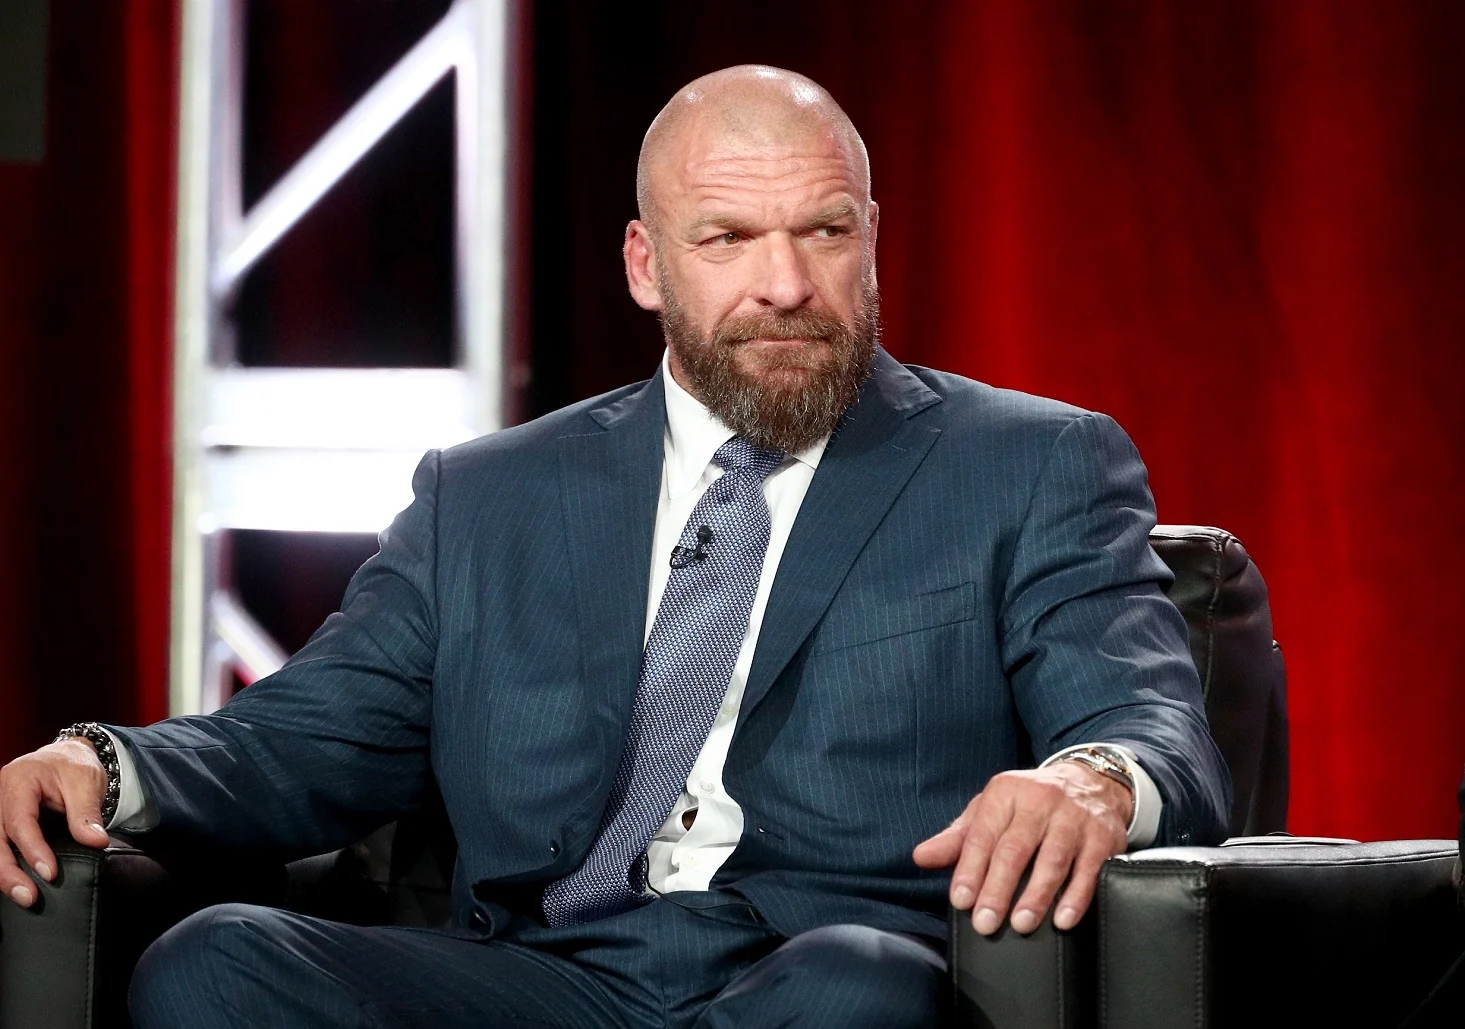 Triple H is one of the richest and successful professional wrestlers in WWE history, becoming enormously wealthy with a net worth of $15